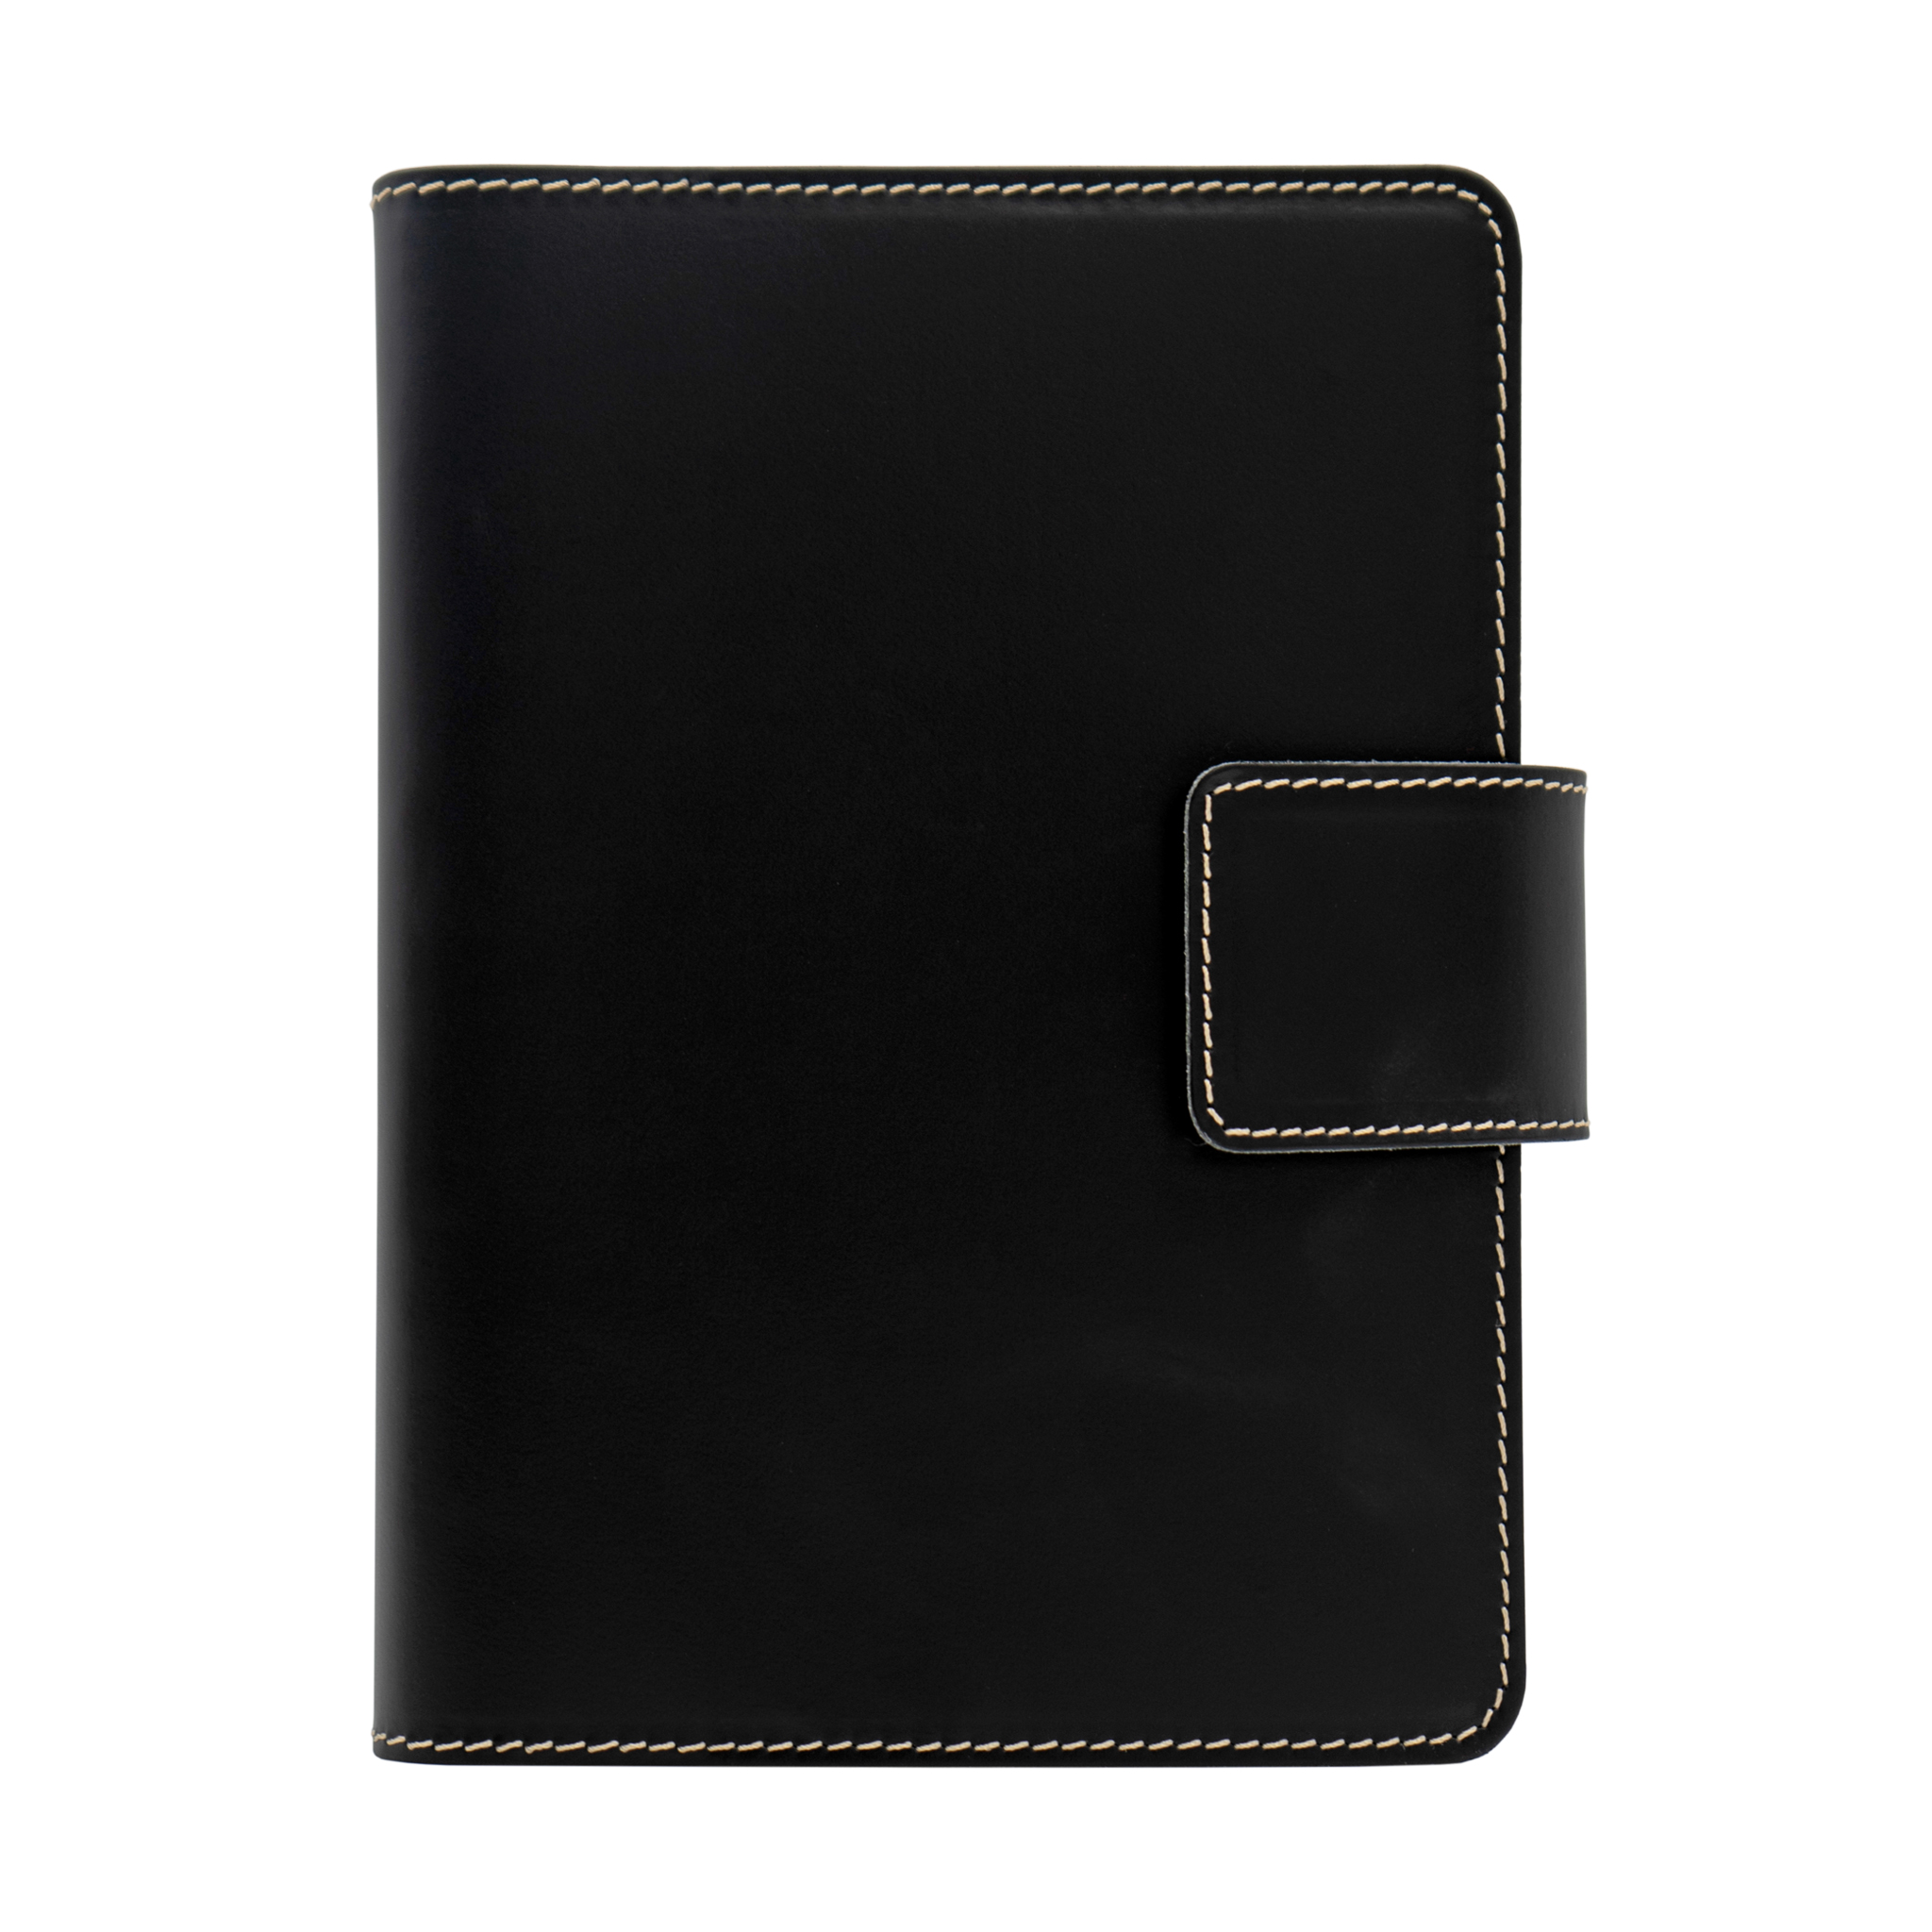 A7042-BLK - Pescara Journal with Snap Black